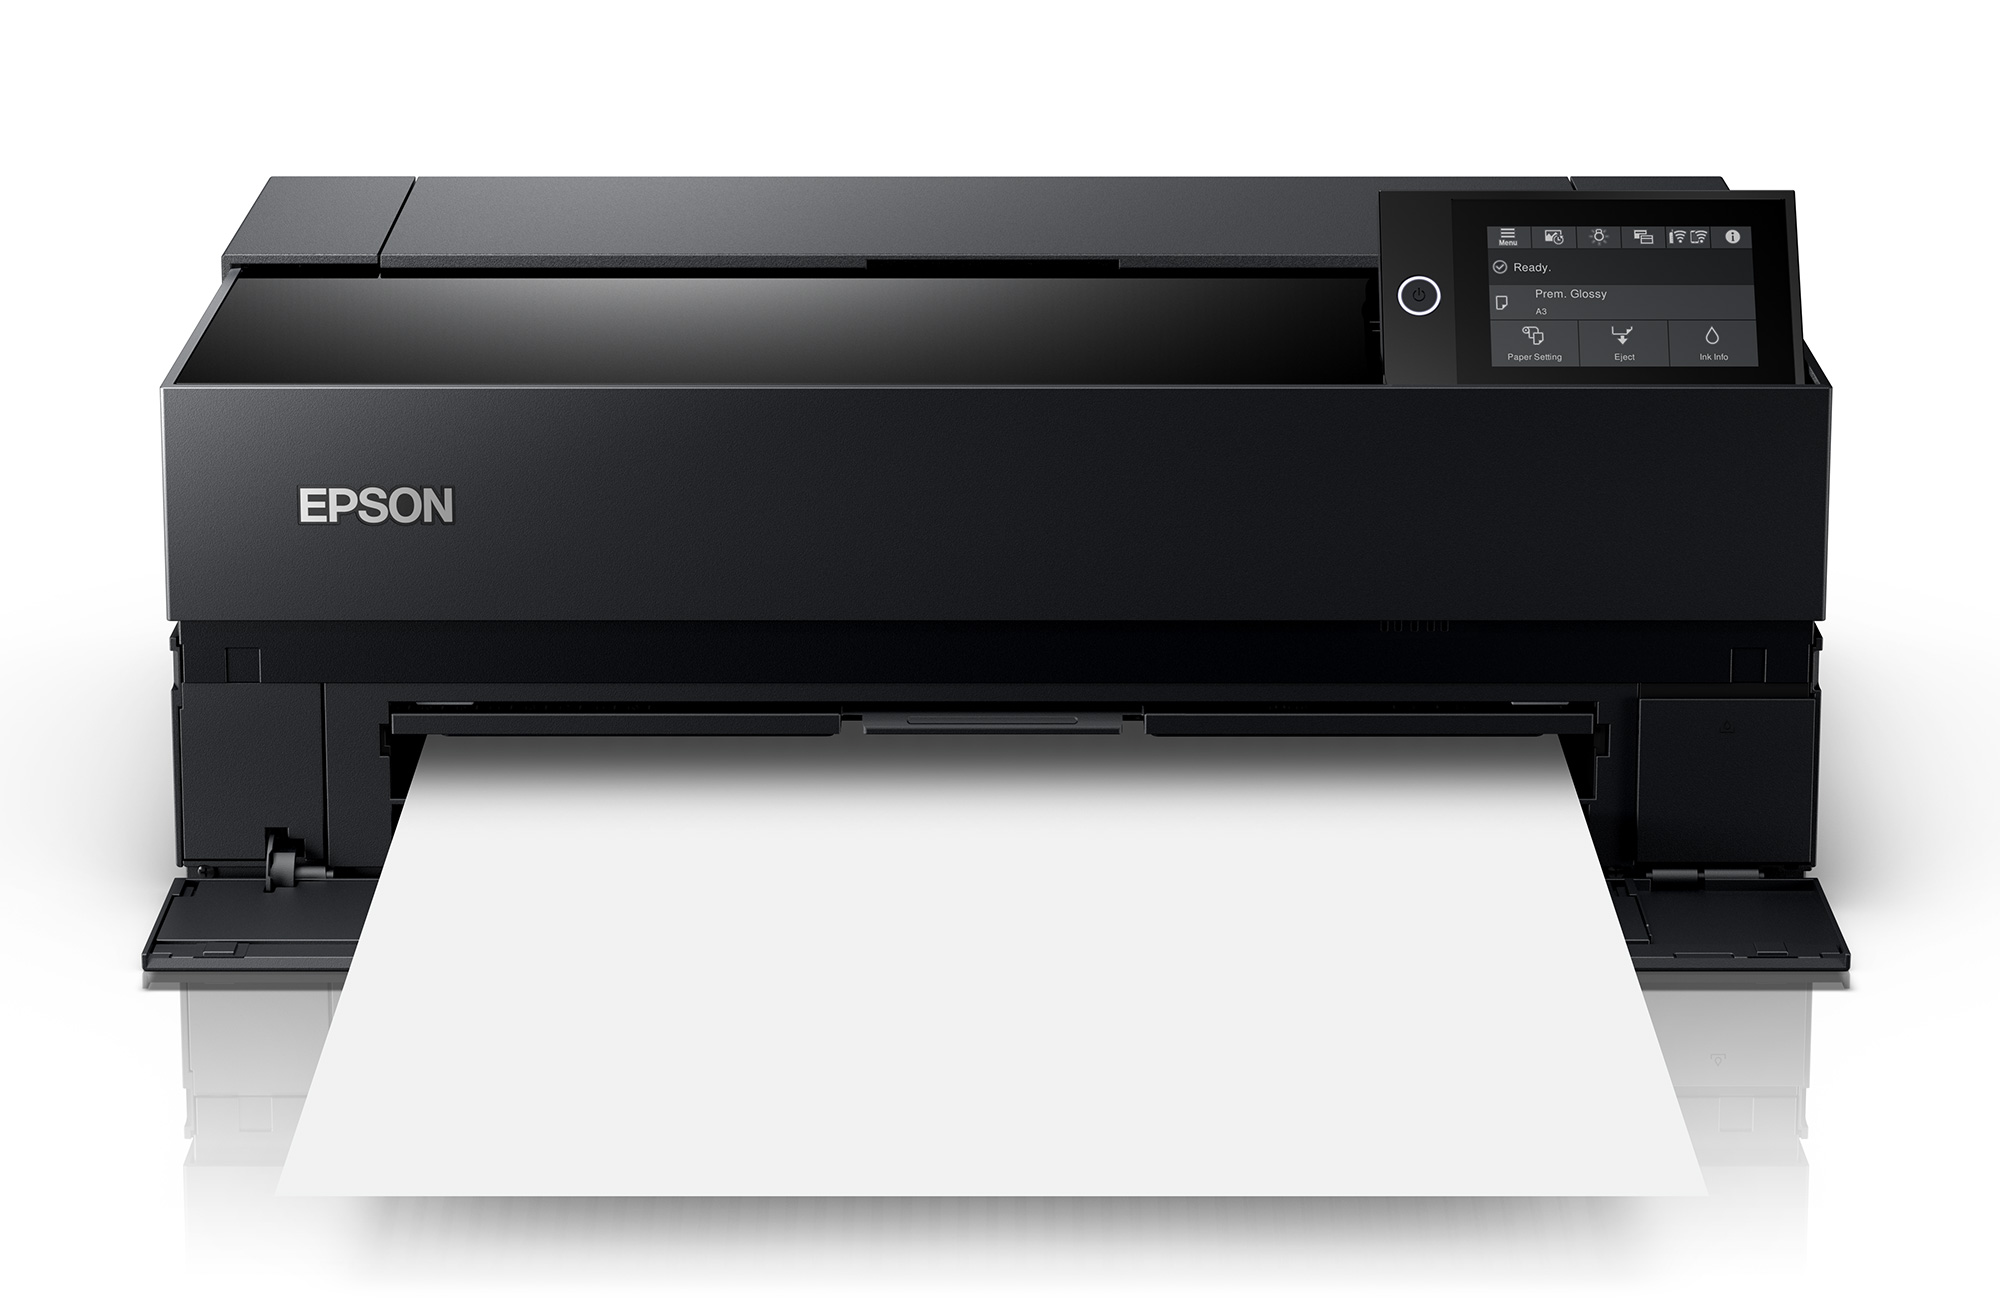 Epson P700 Review